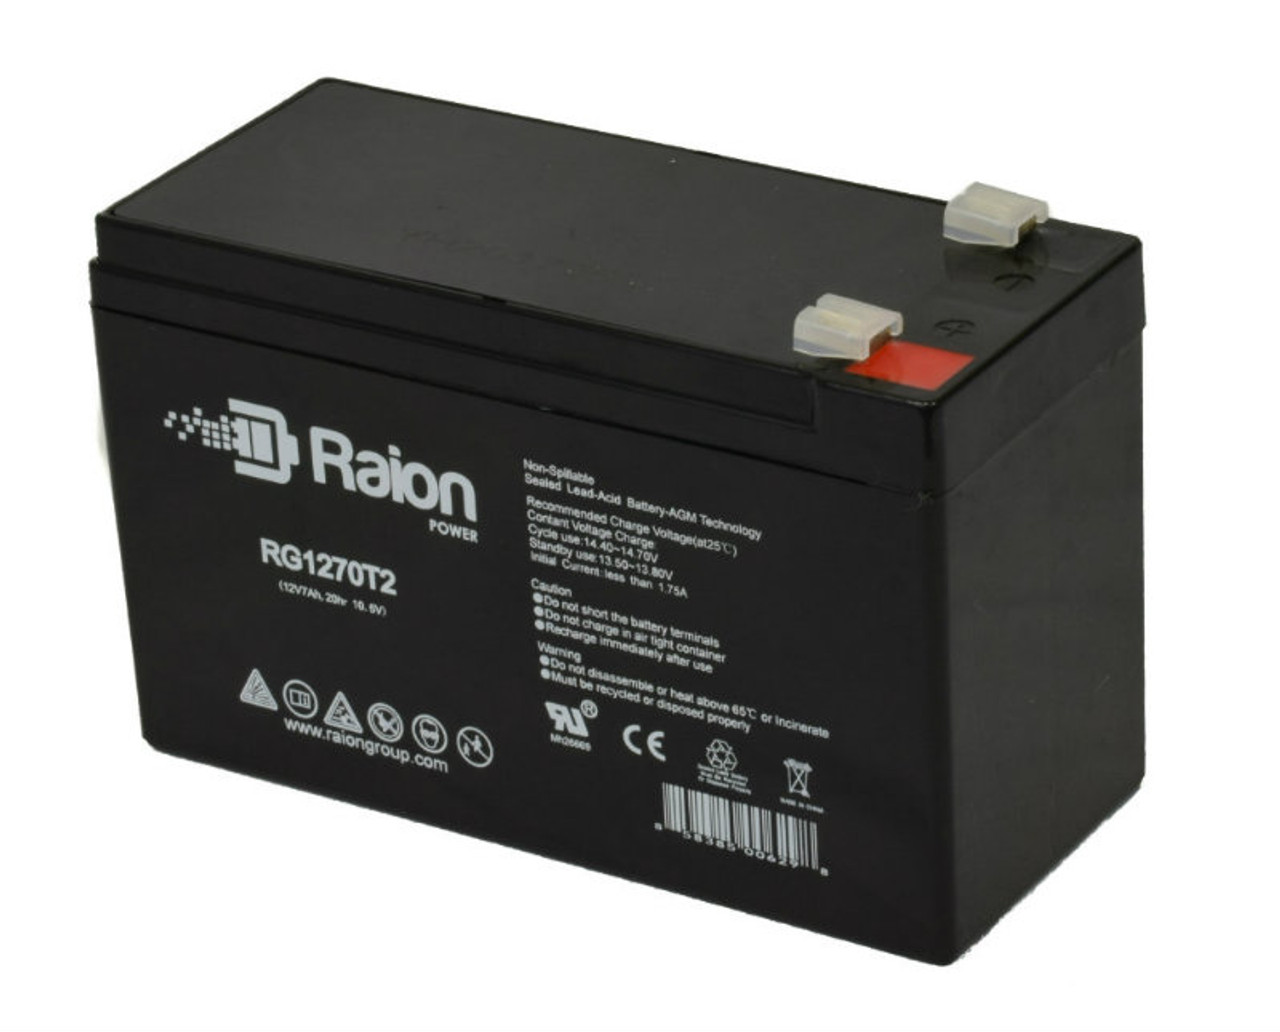 Raion Power RG1270T1 12V 7Ah Non-Spillable Replacement Battery for Yuntong YT-1270